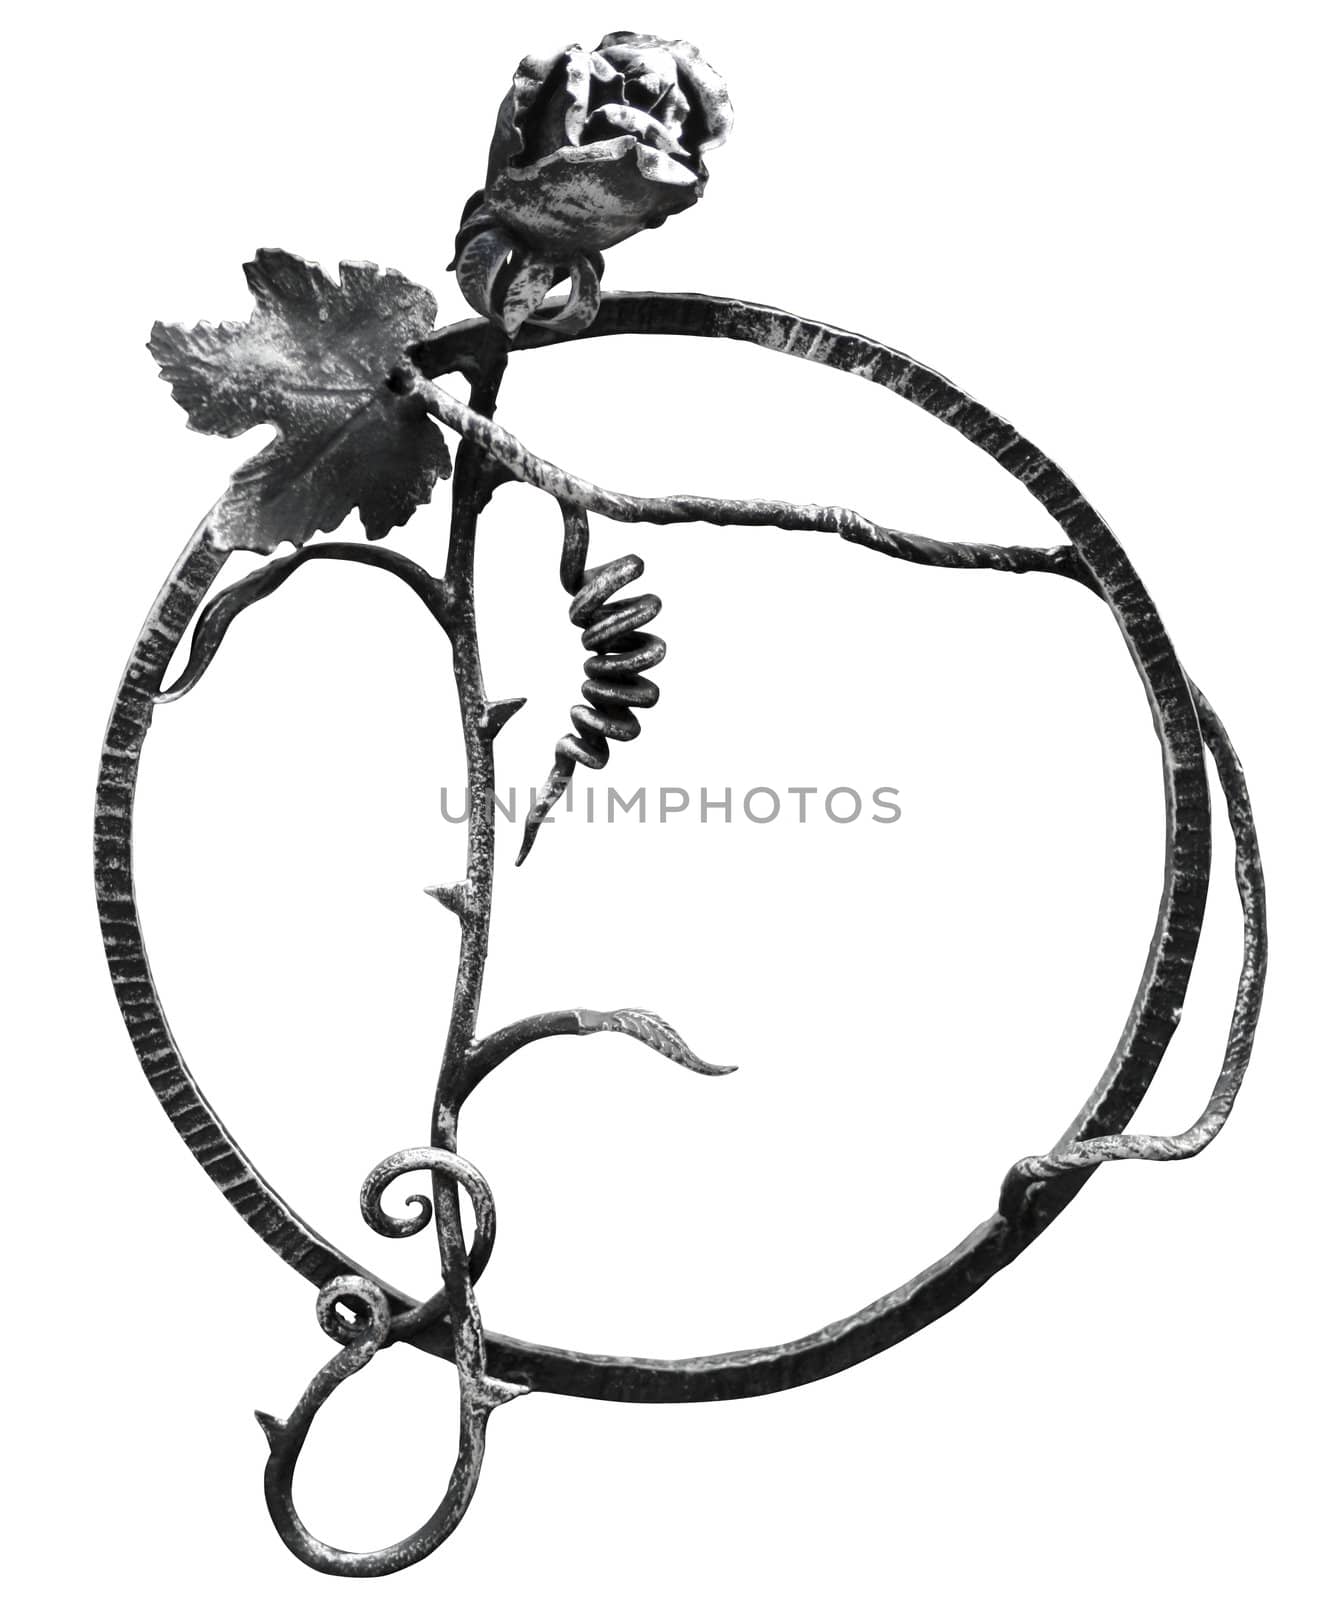 Forged ring with rose, vine and spiral